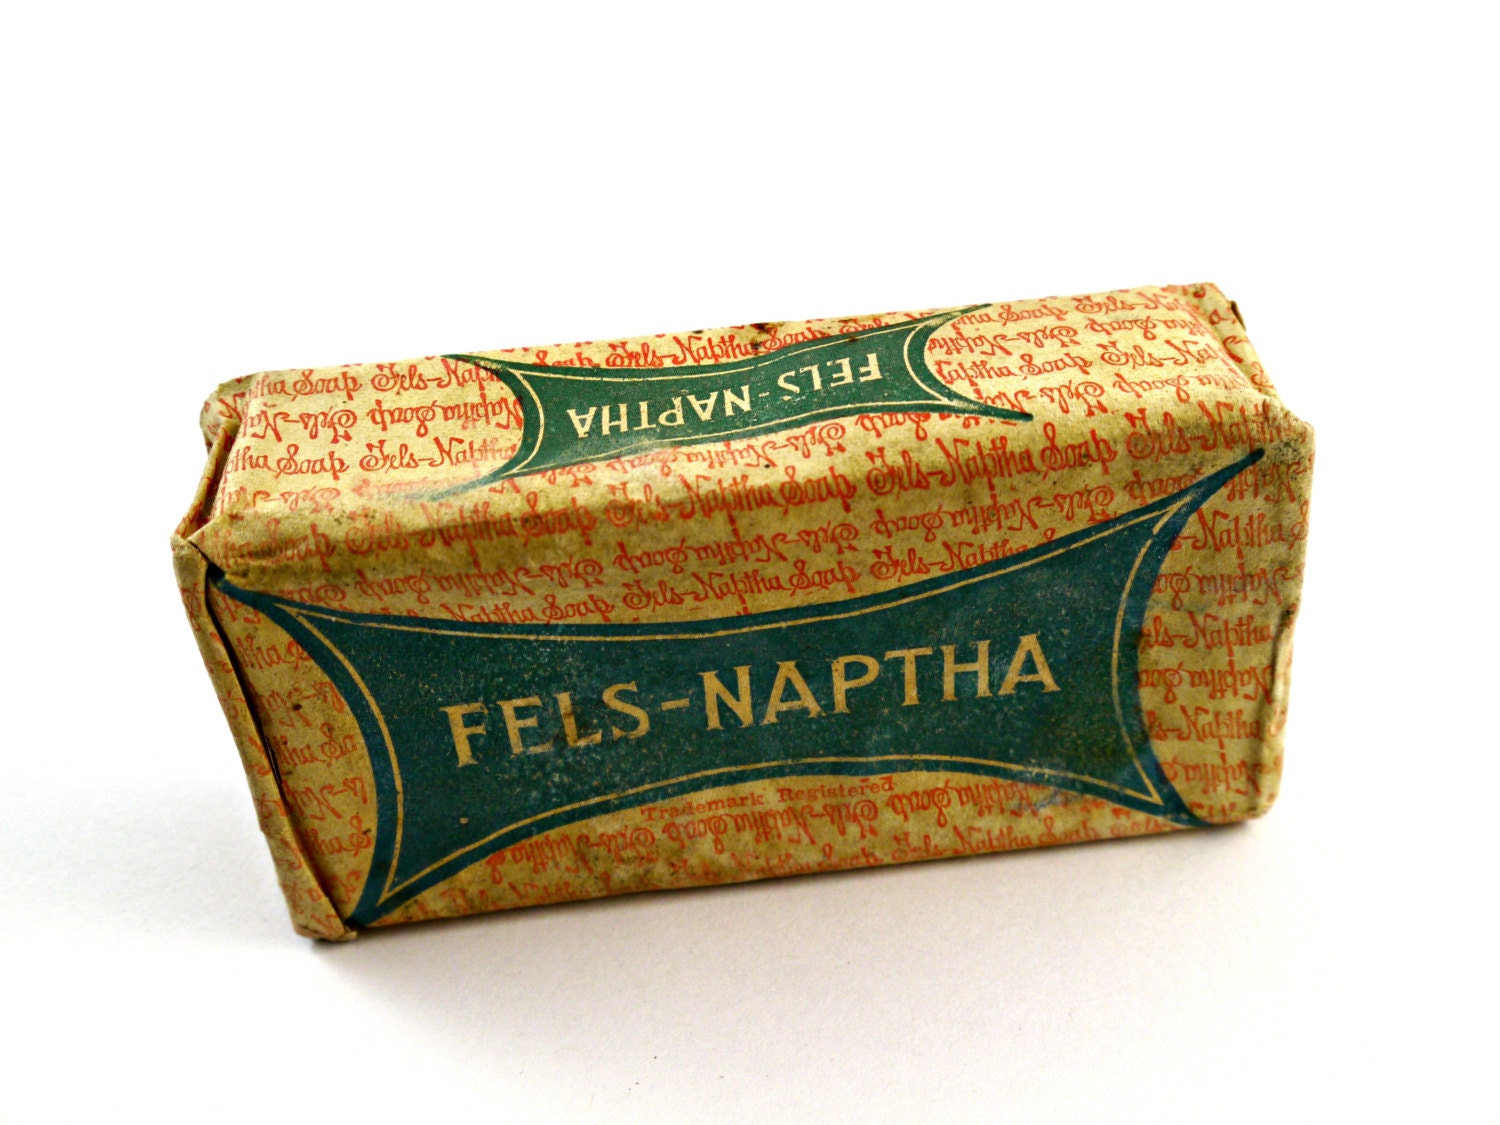 What stores sell Fels-Naptha?